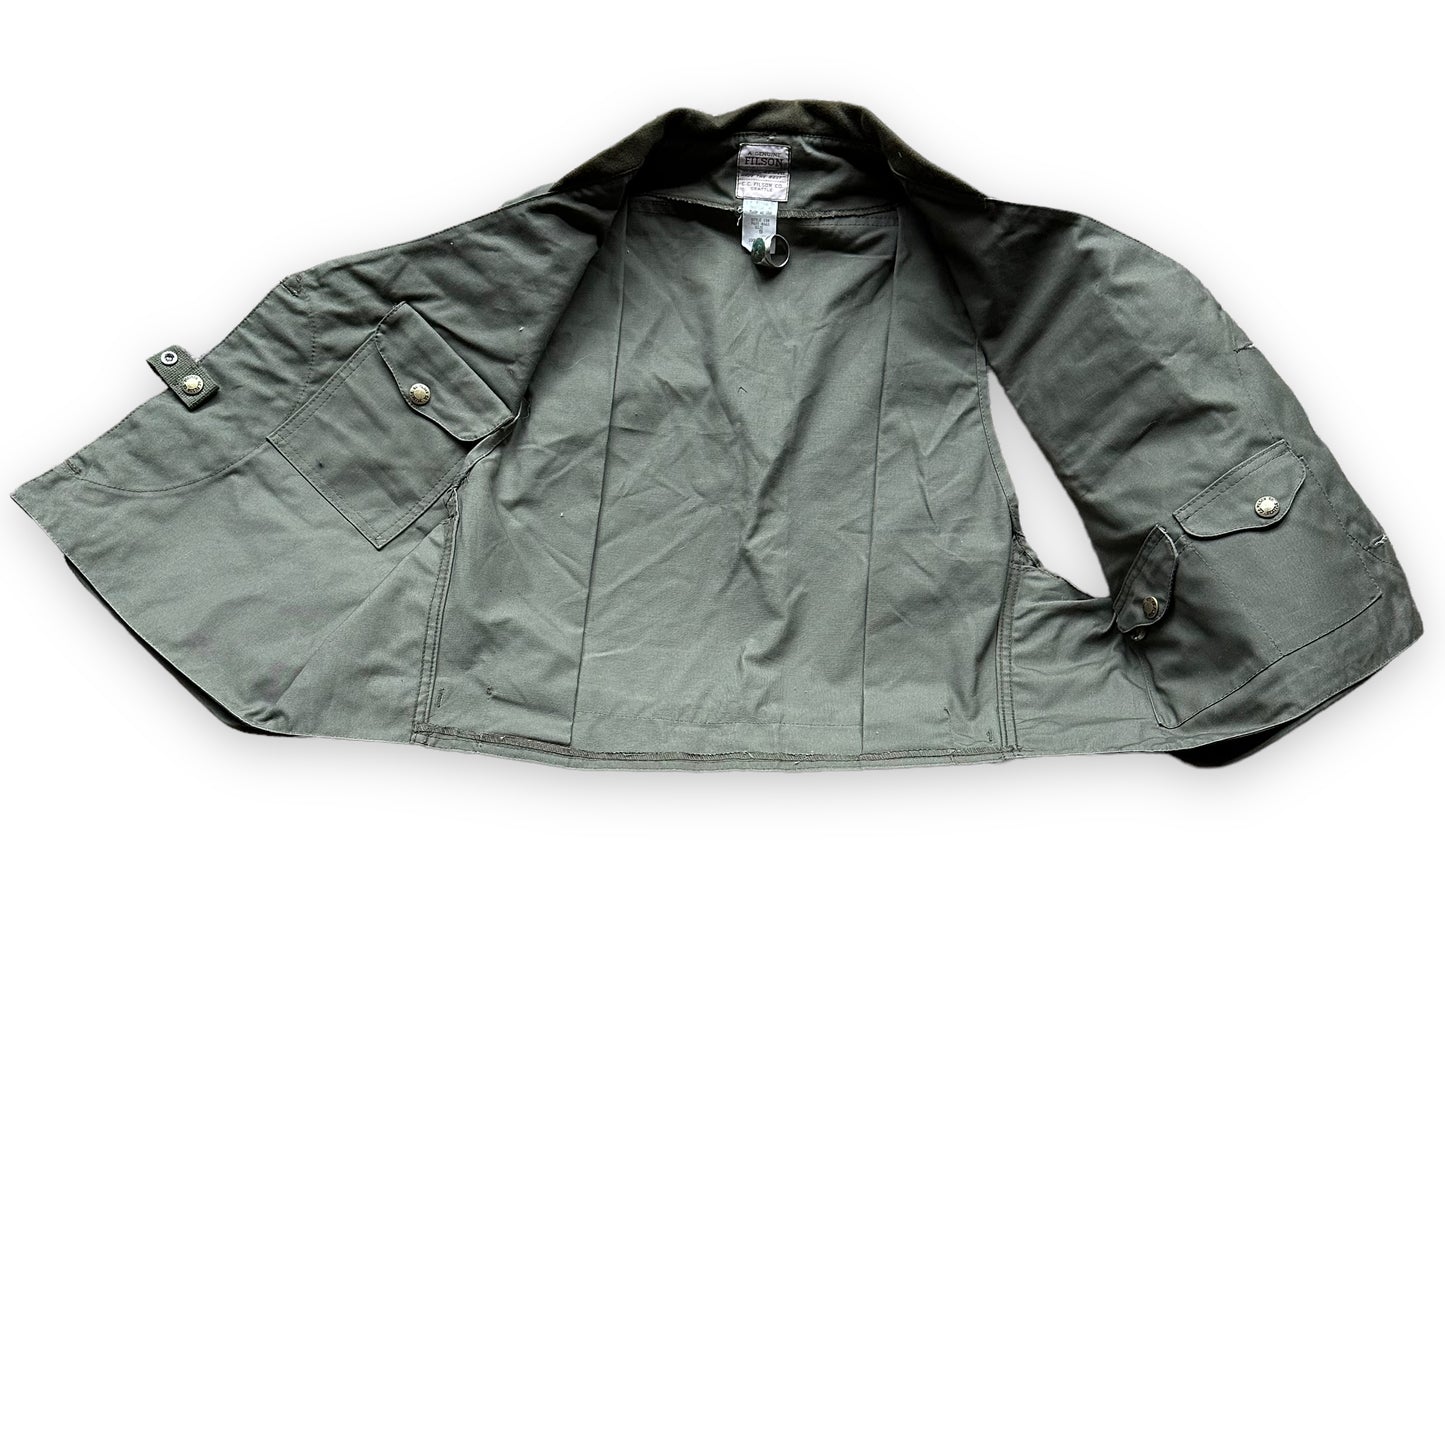 Filson Fly Fishing Vest - Style 134 - XL - The Hull Truth - Boating and  Fishing Forum